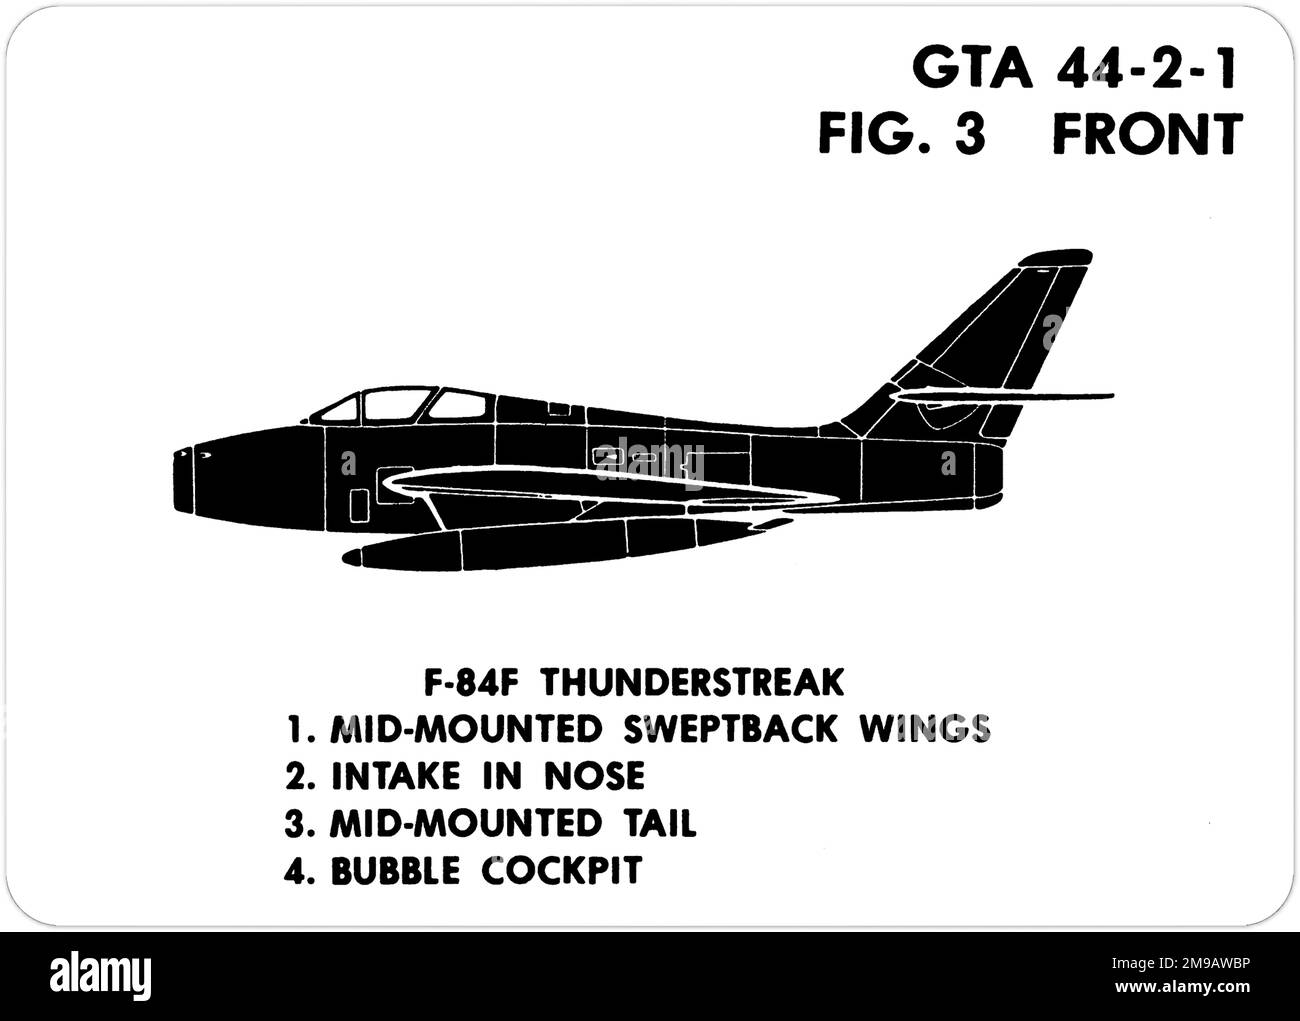 Republic F-84F Thunderstreak profile. This is one of the series of Graphics Training Aids (GTA) used by the United States Army to train their personnel to recognize friendly and hostile aircraft. This particular set, GTA 44-2-1, was issued in July1977. The set features aircraft from: Canada, Italy, United Kingdom, United States, and the USSR. Stock Photo